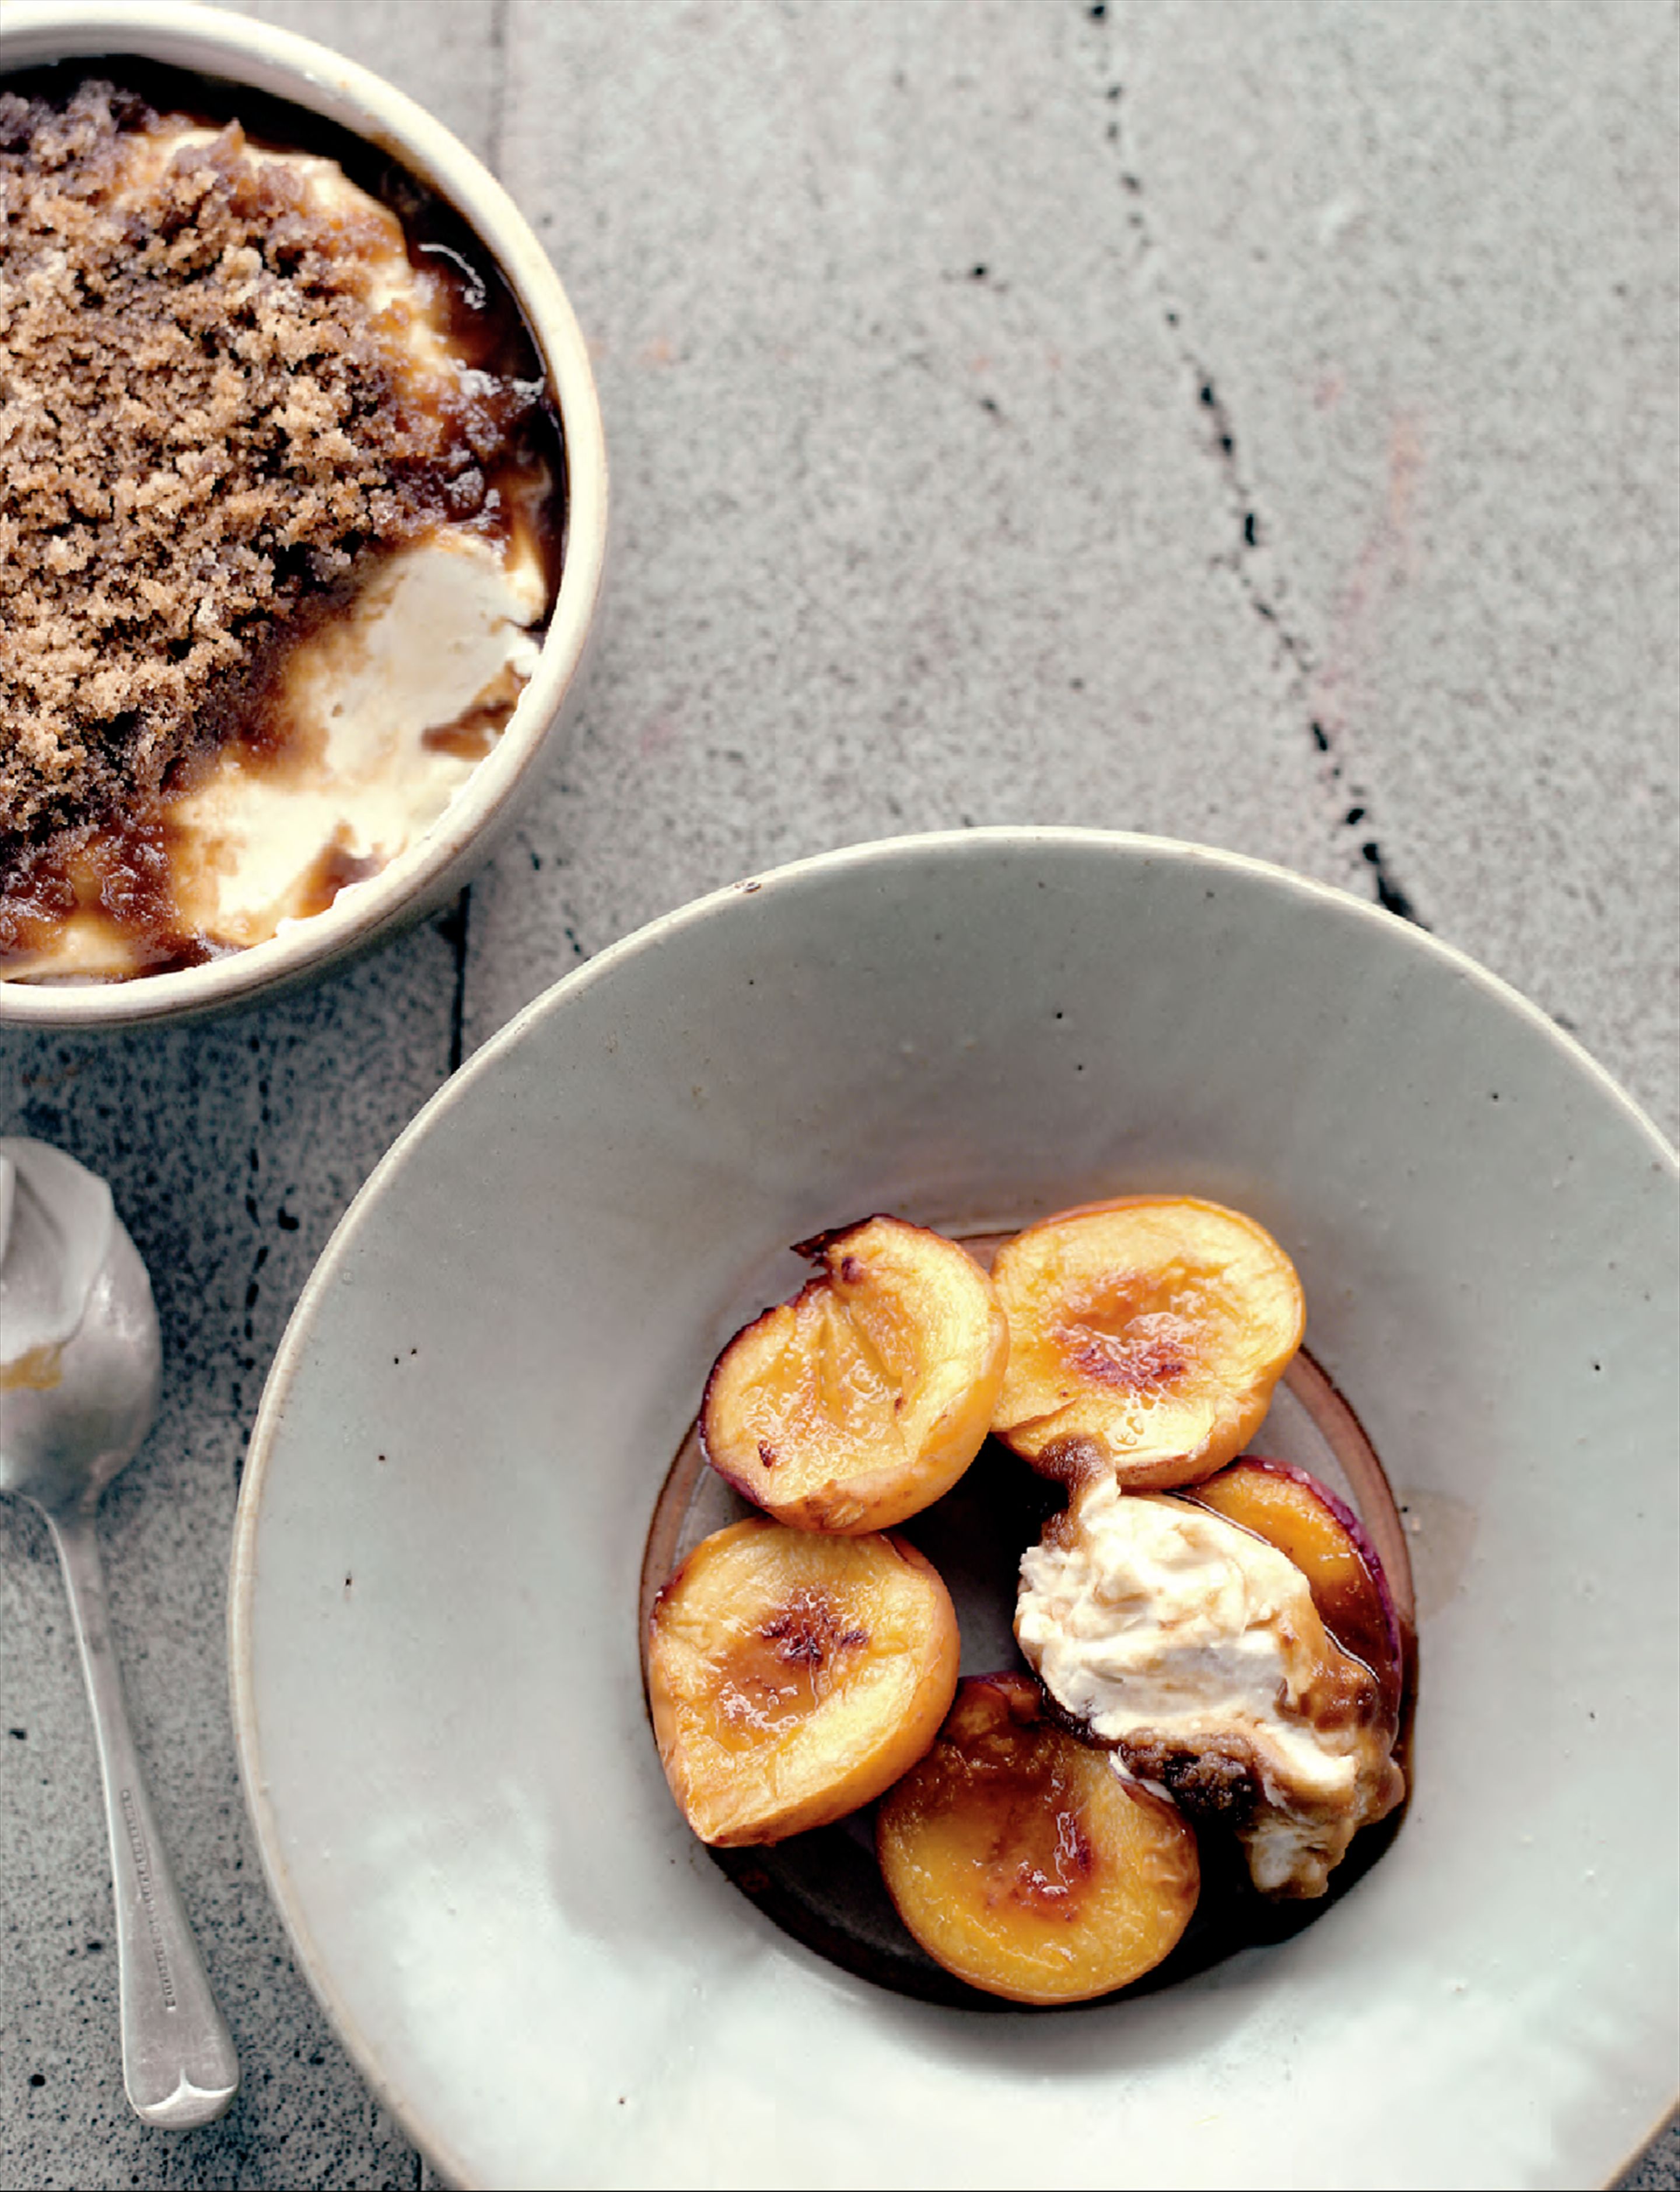 Slow-roasted nectarines with yoghurt, cream and brown sugar